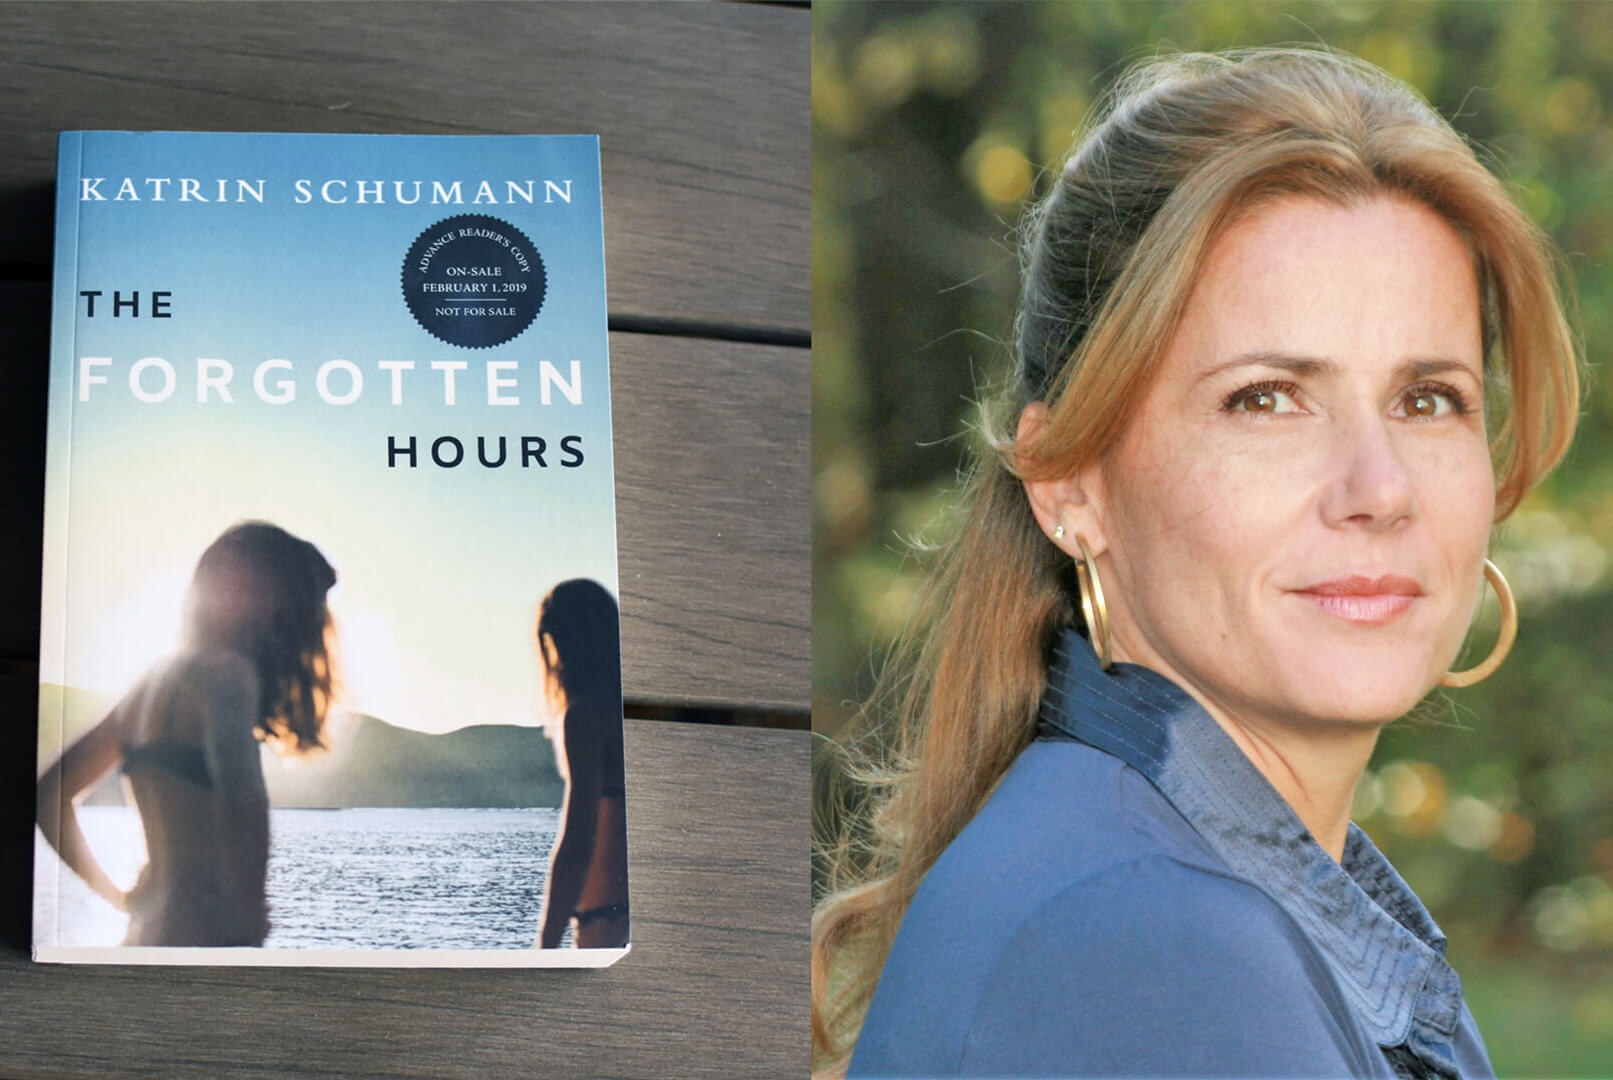 Q&A with Katrin Schumann, Author of The Forgotten Hours